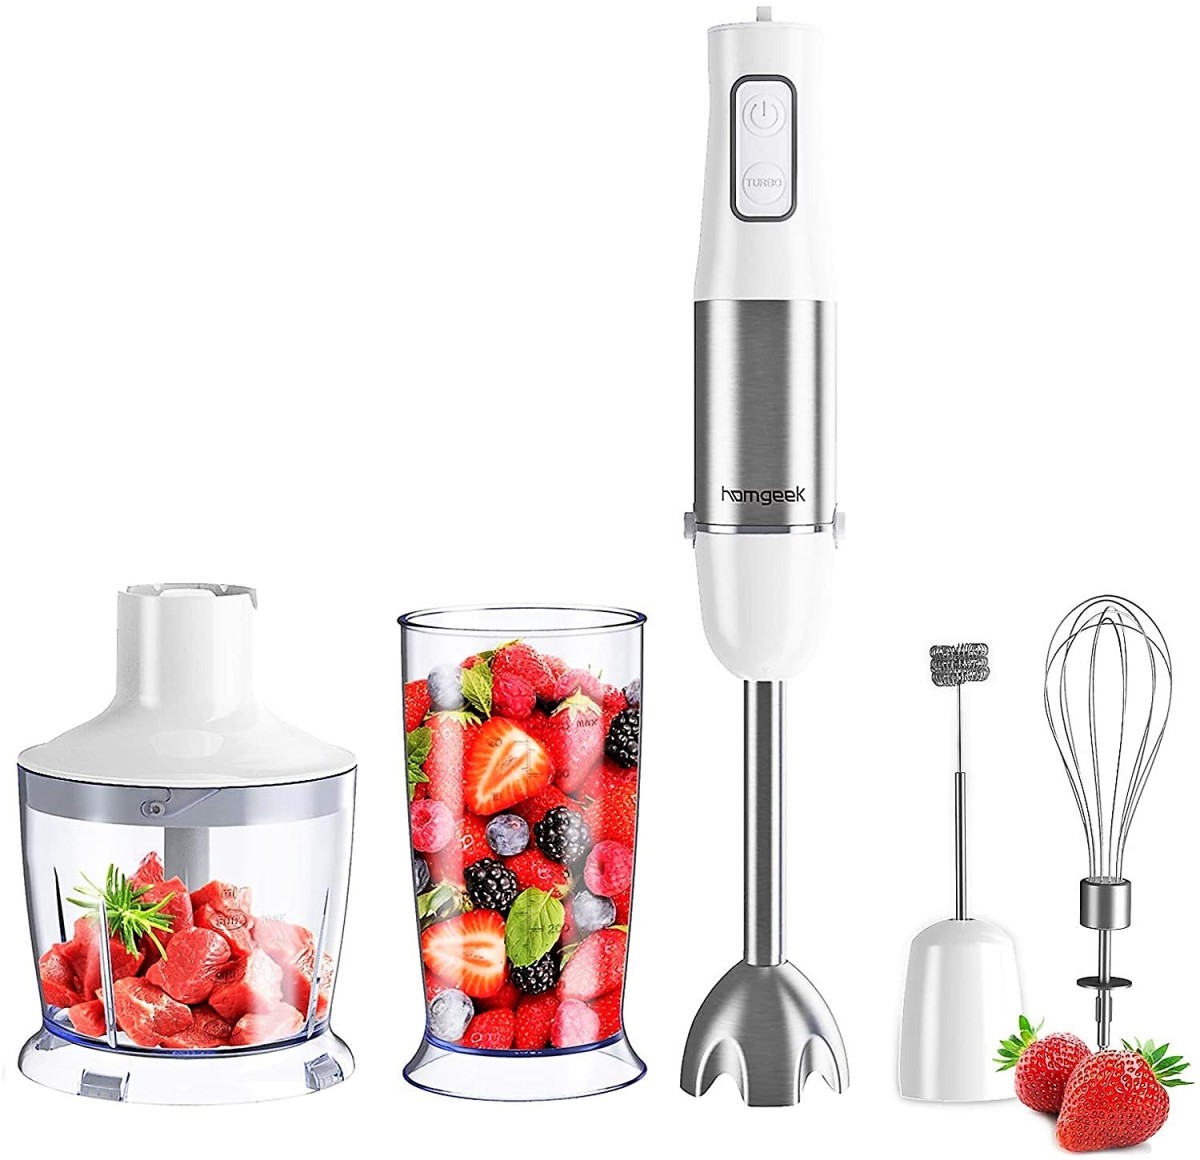 Homgeek 5-in-1 Hand Blender Review: The Top Mixer for the Holidays